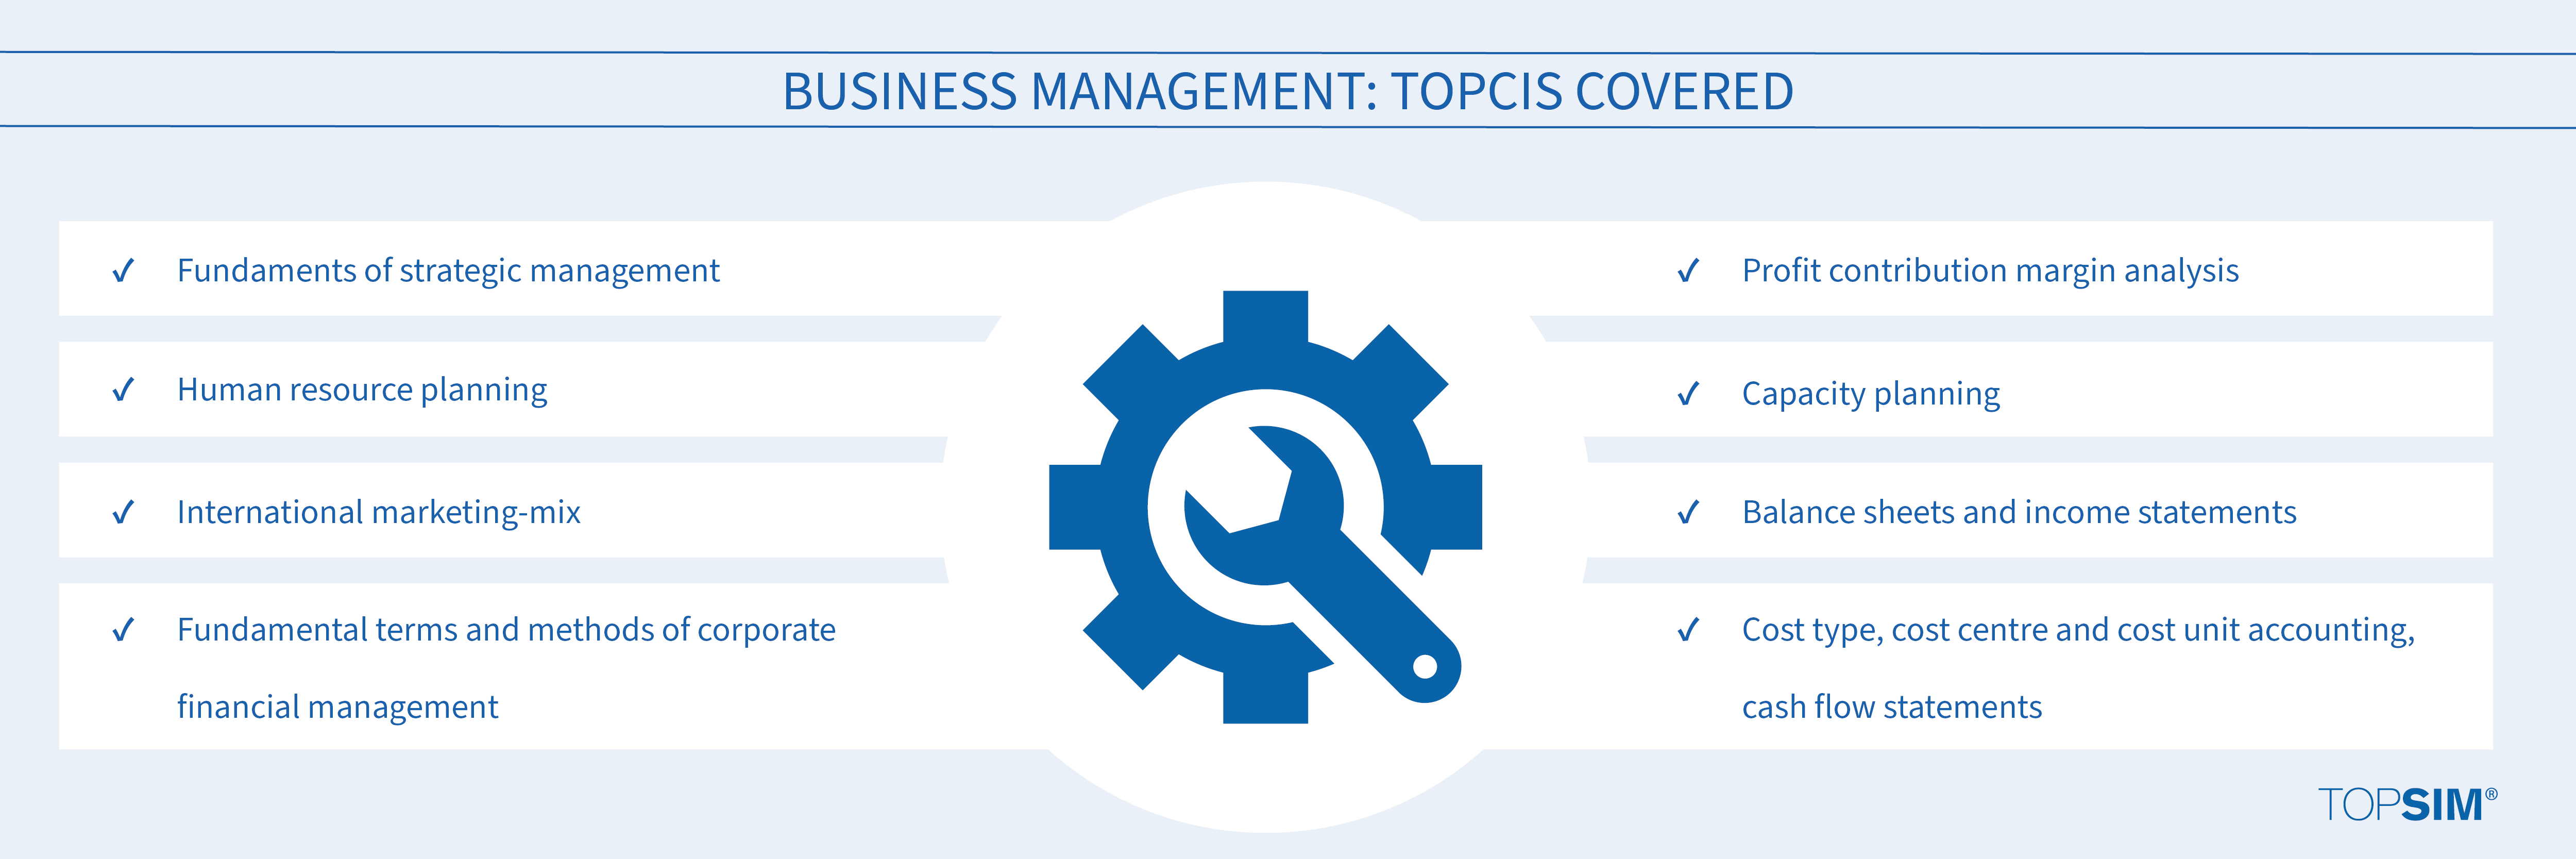 Topics covered: Business Management